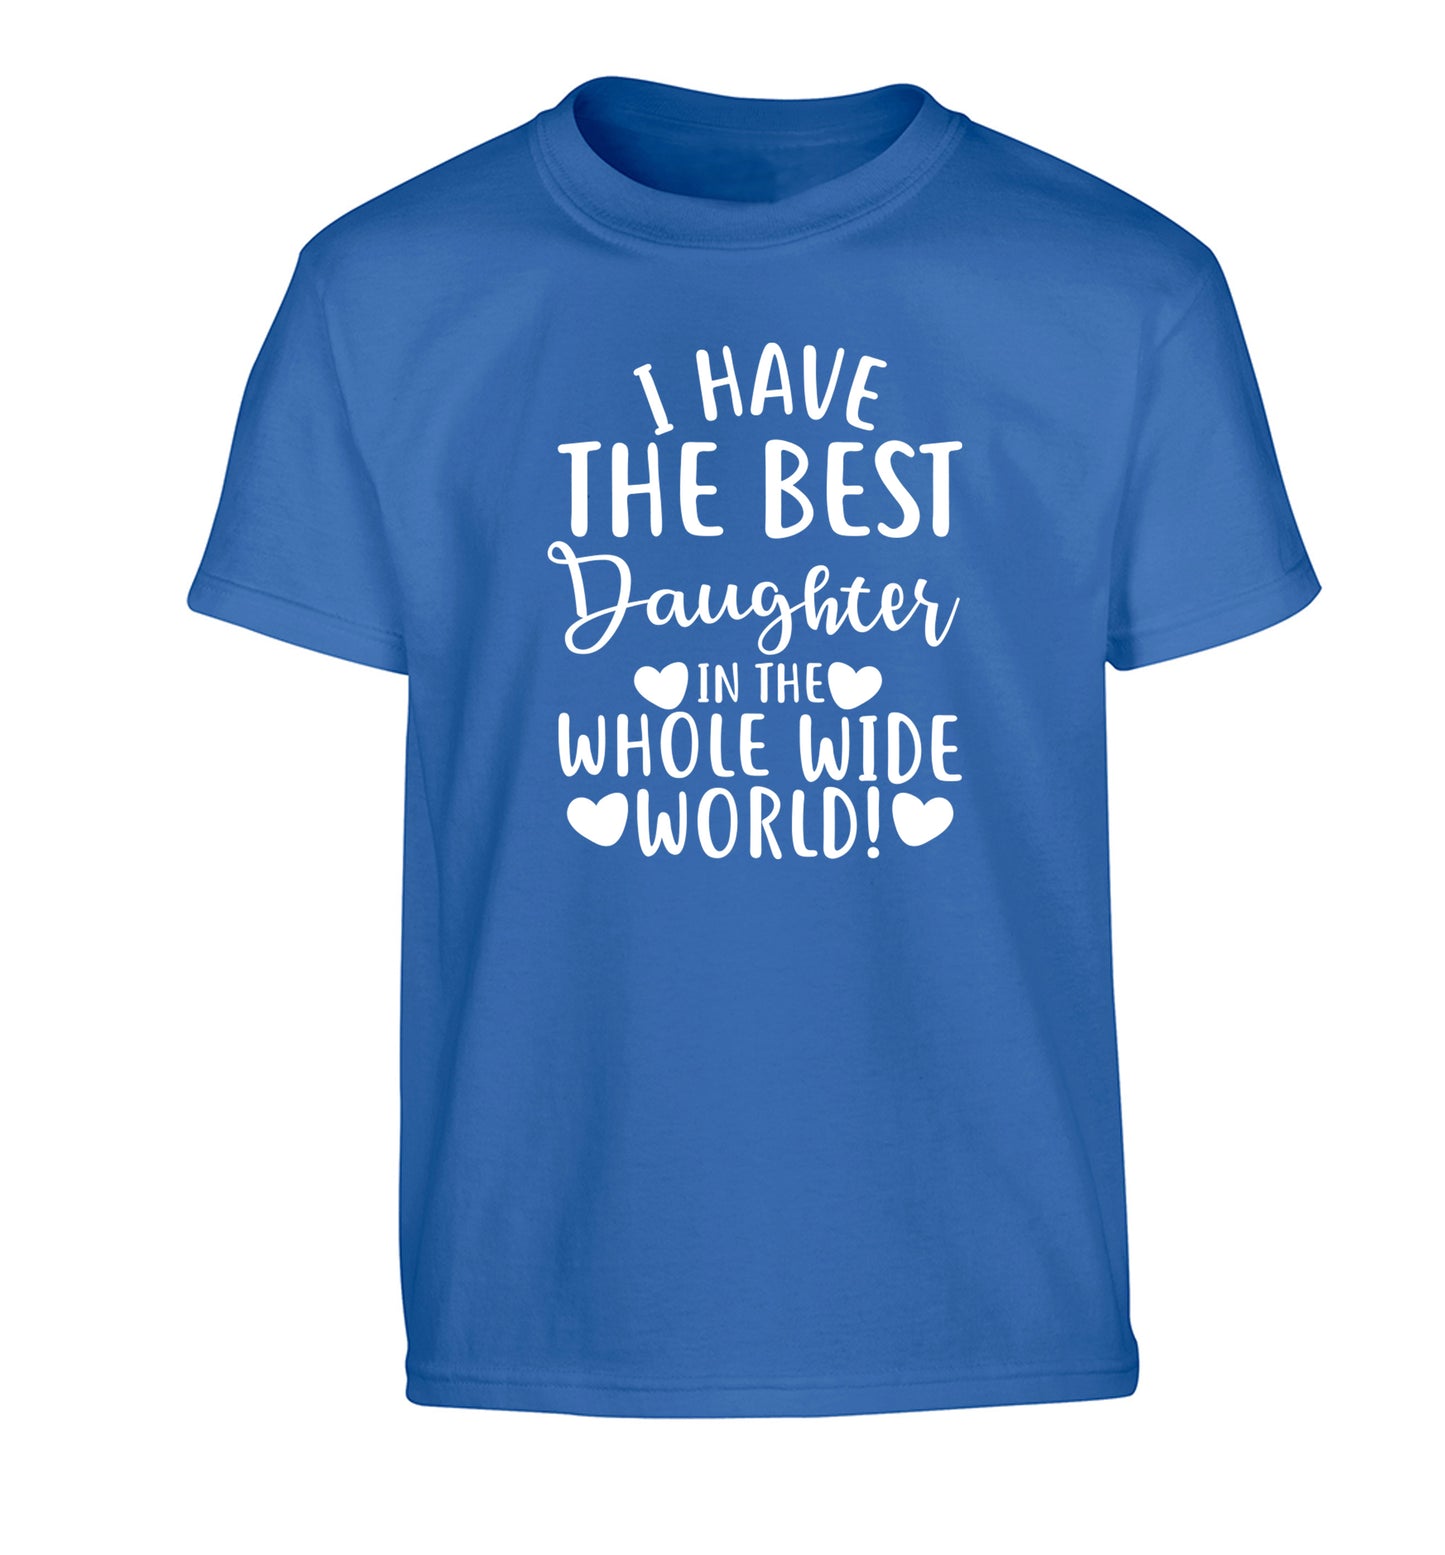 I have the best daughter in the whole wide world! Children's blue Tshirt 12-13 Years